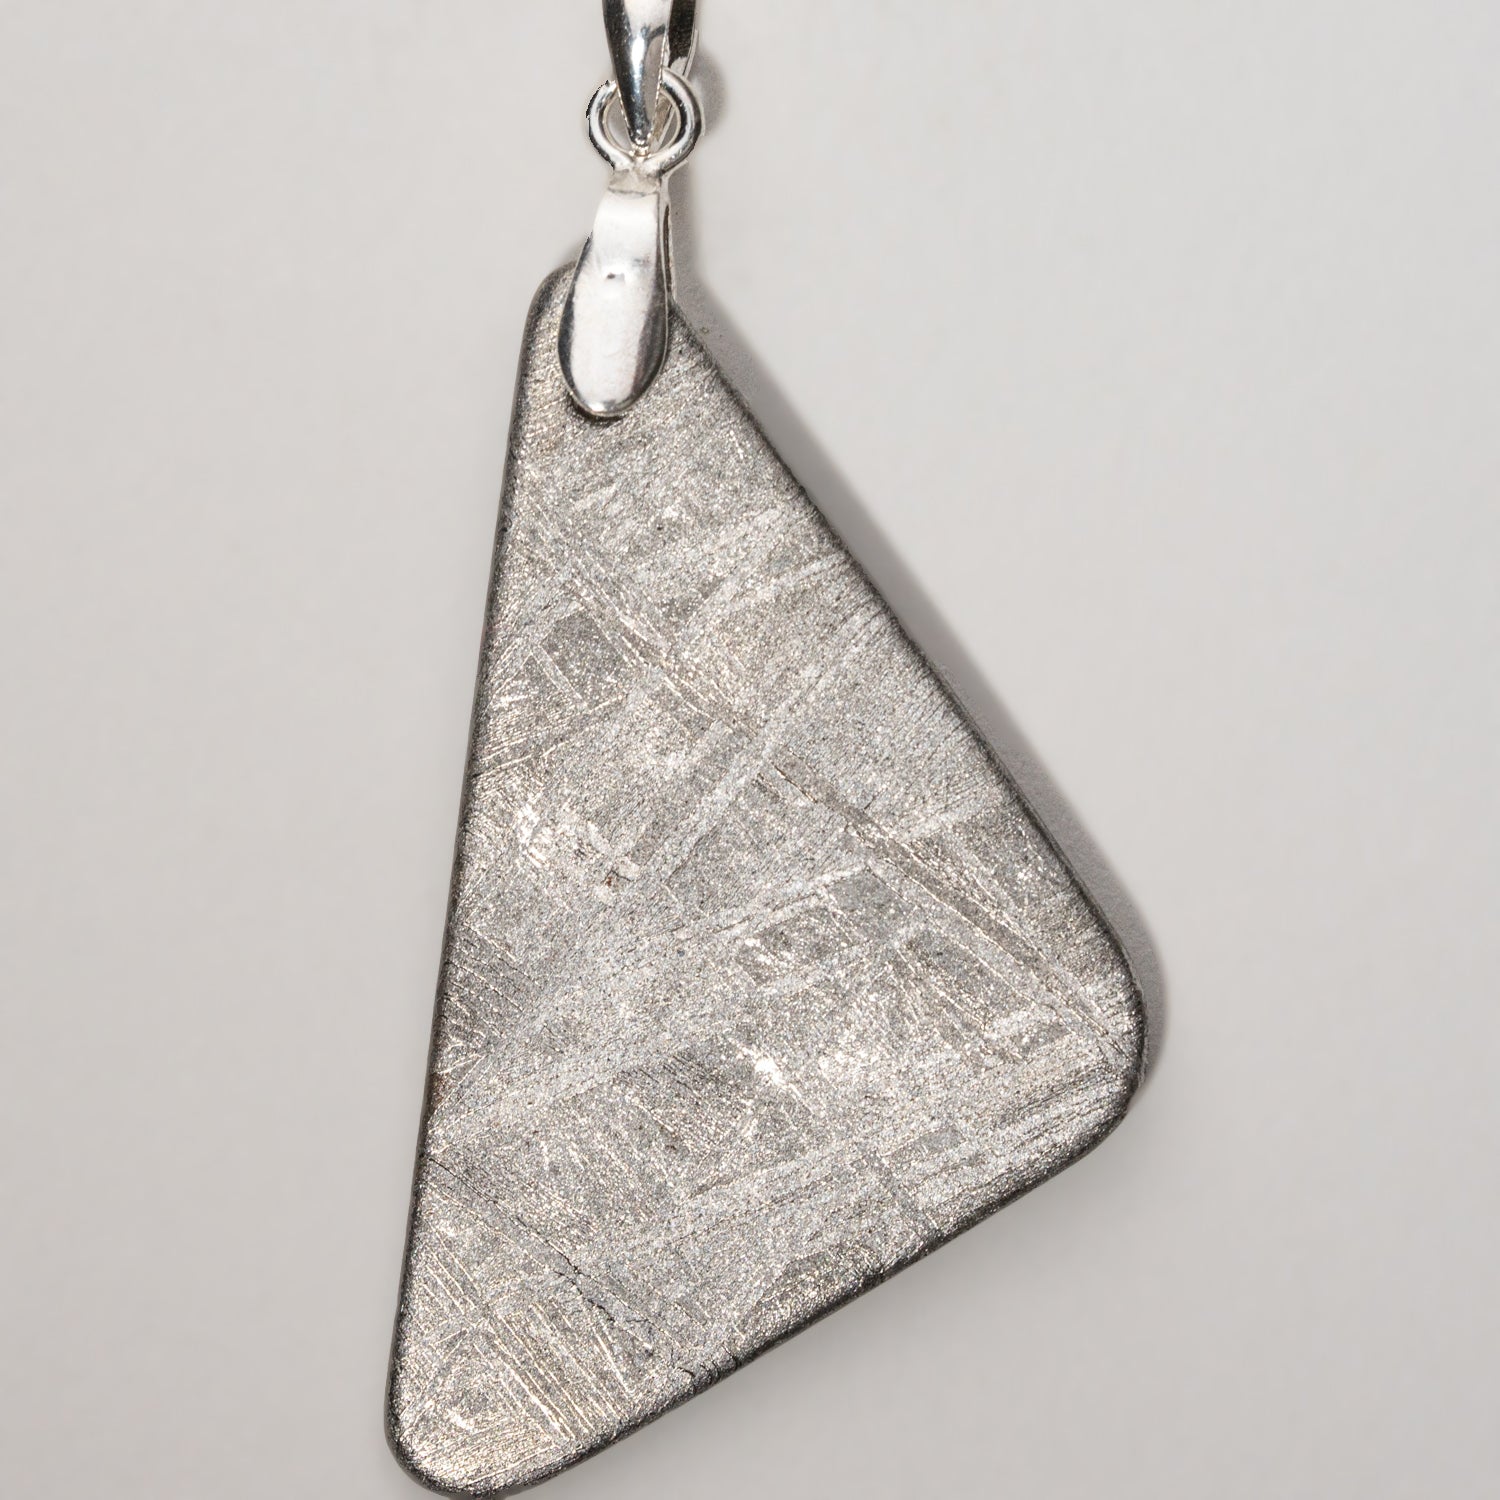 Polished Seymchan Meteorite pendant (6.7 grams) with 18" Sterling Silver Chain